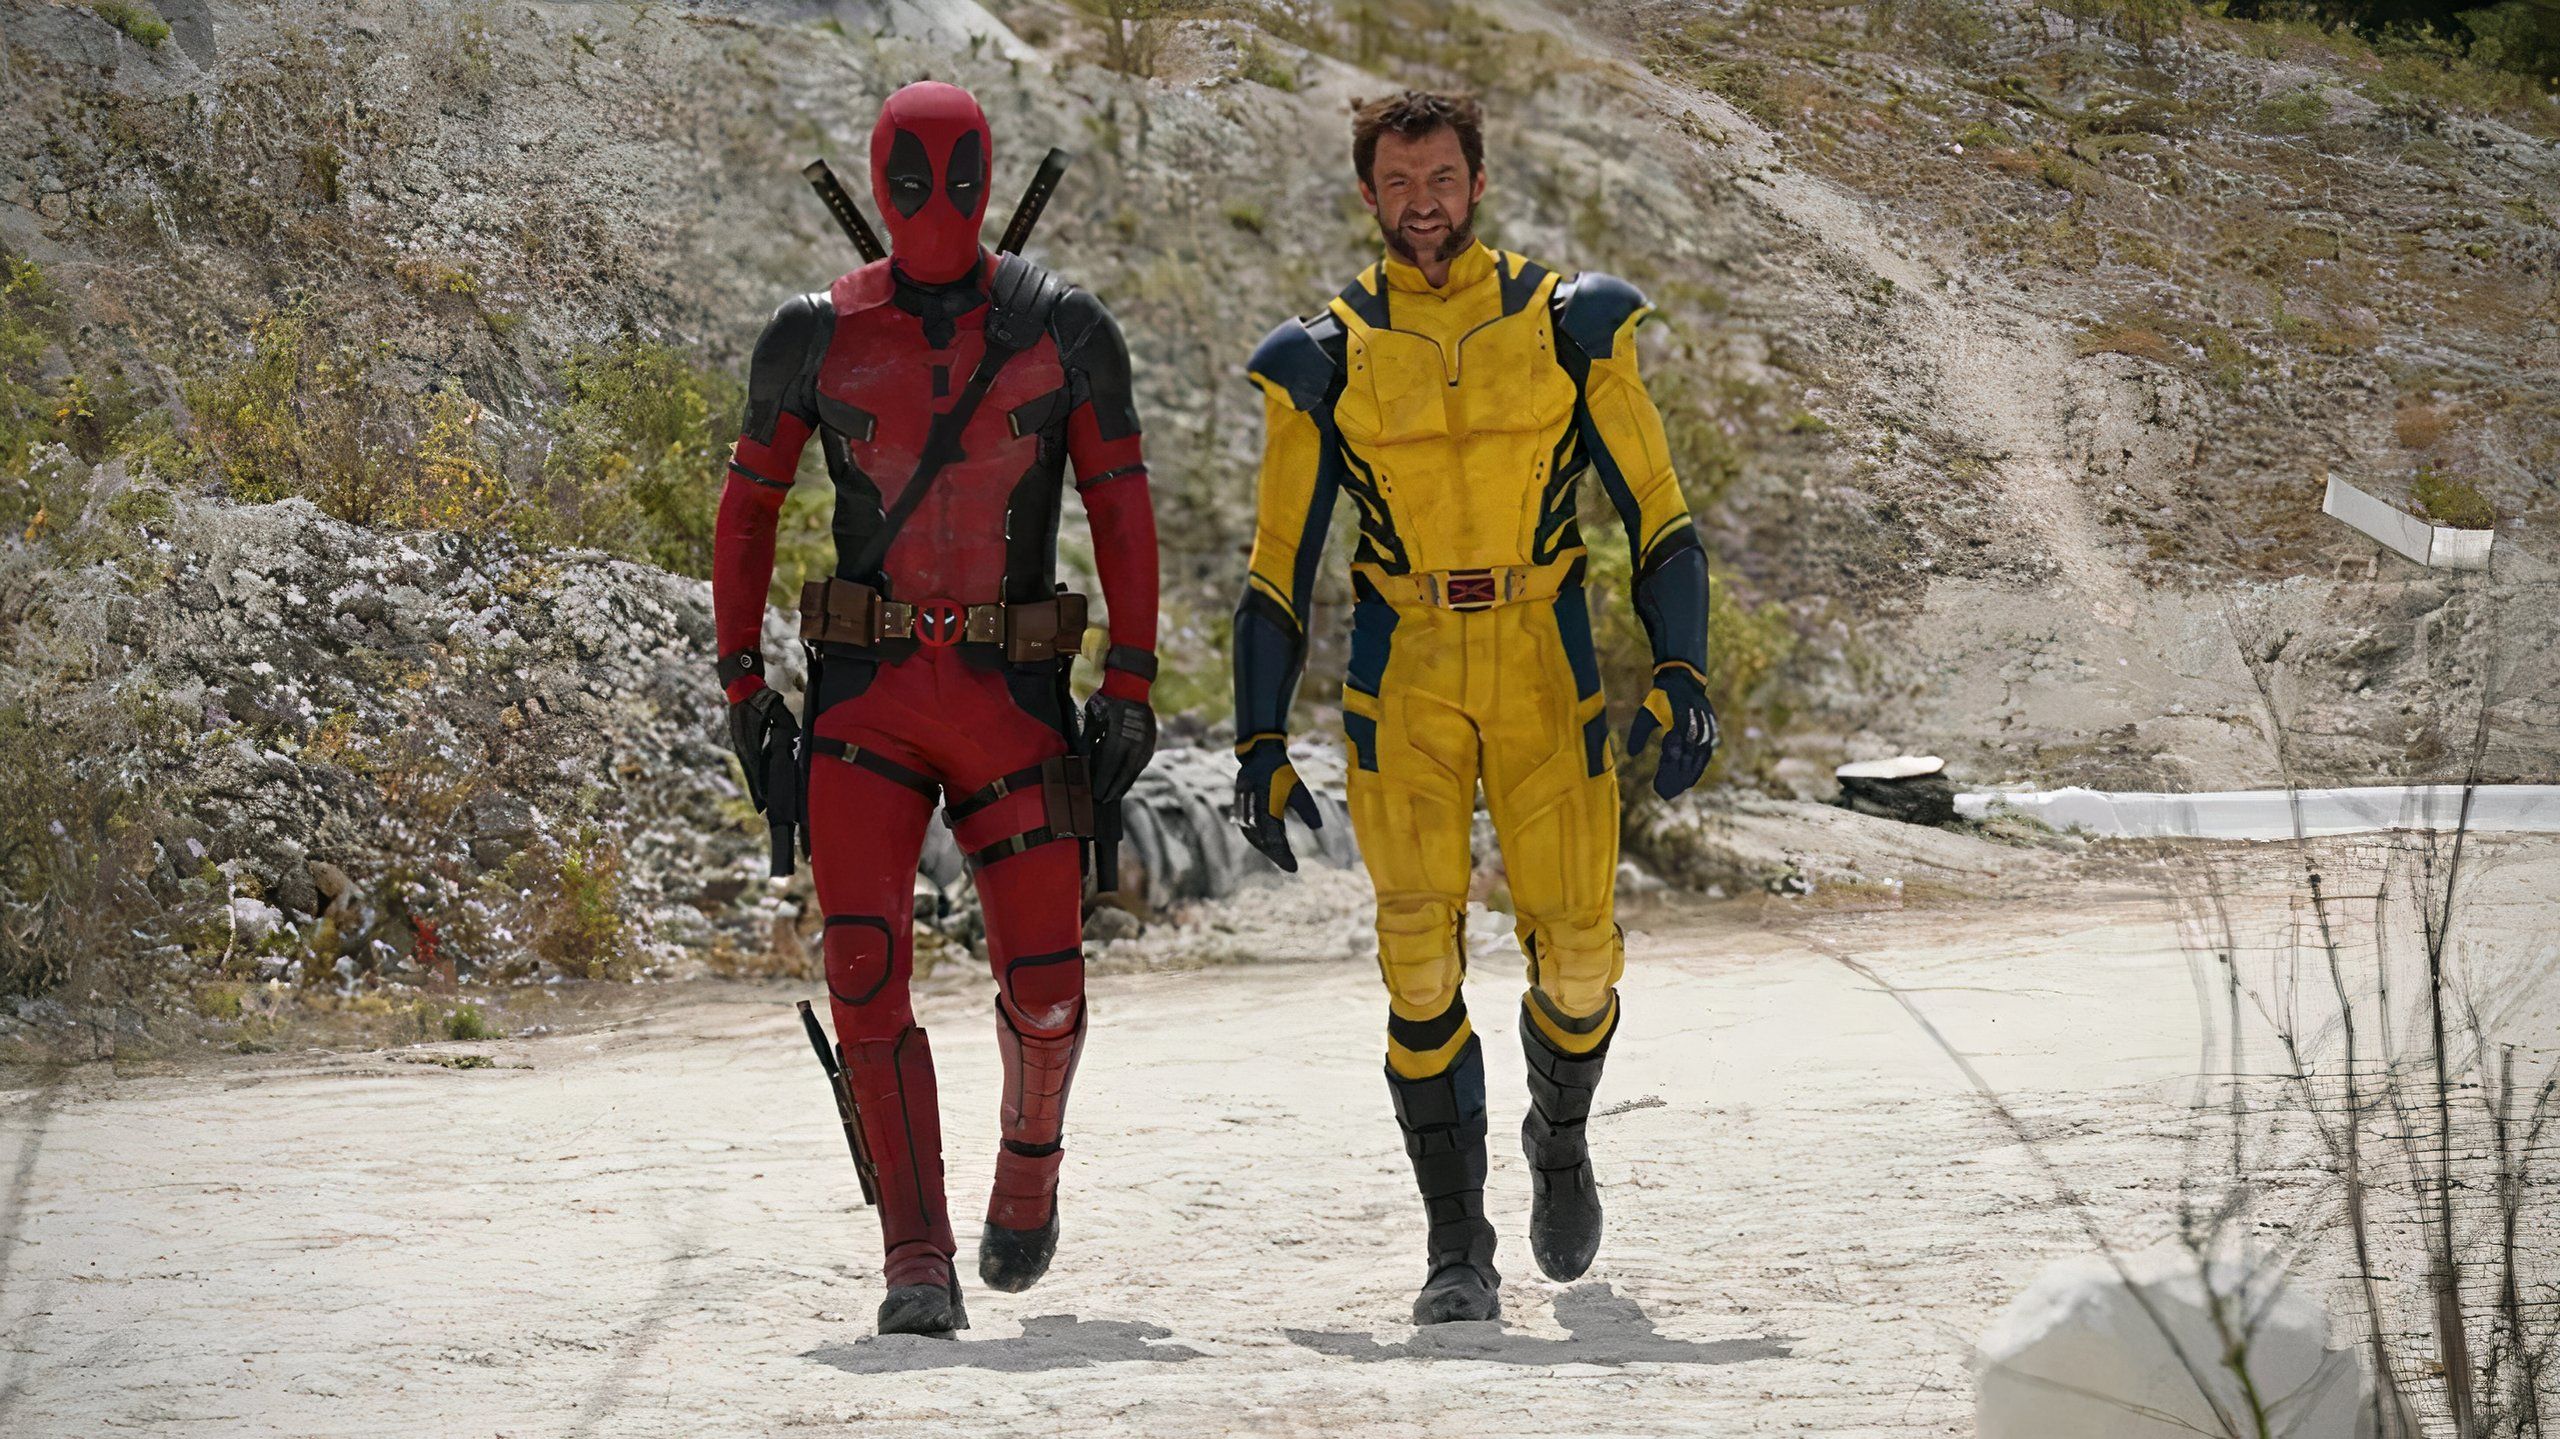 Deadpool and wolverine in image from 2024 film